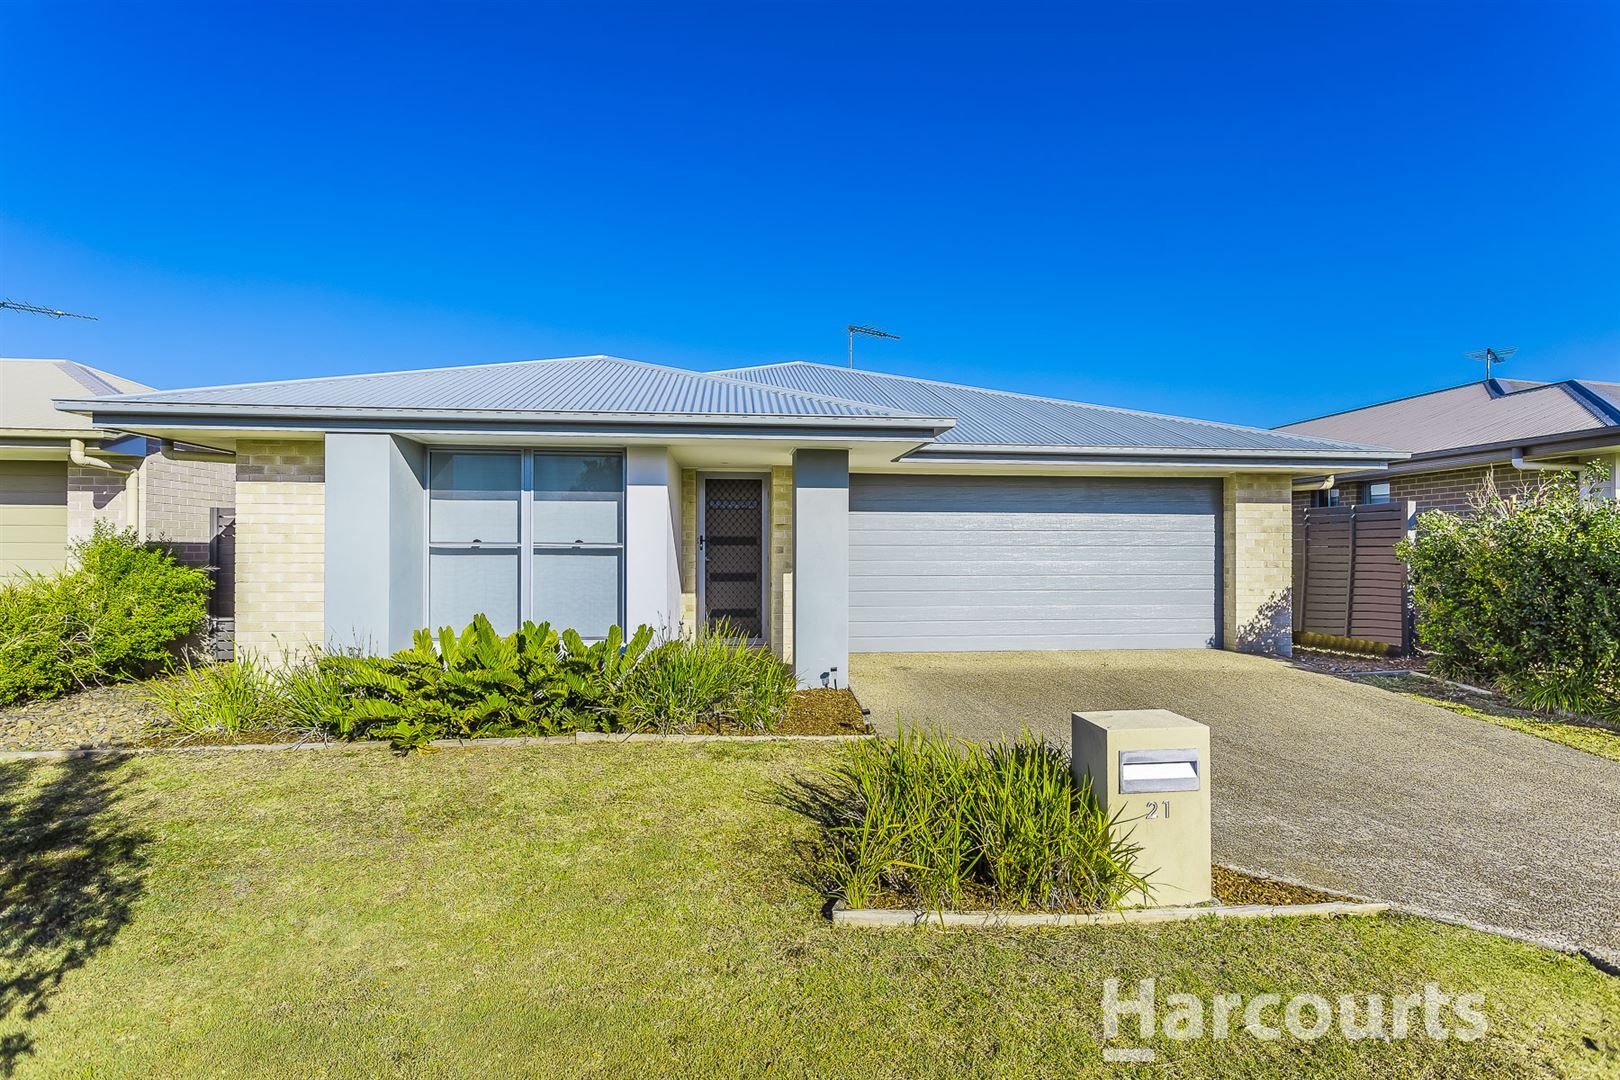 21 Harvey Circuit, Griffin QLD 4503, Image 0